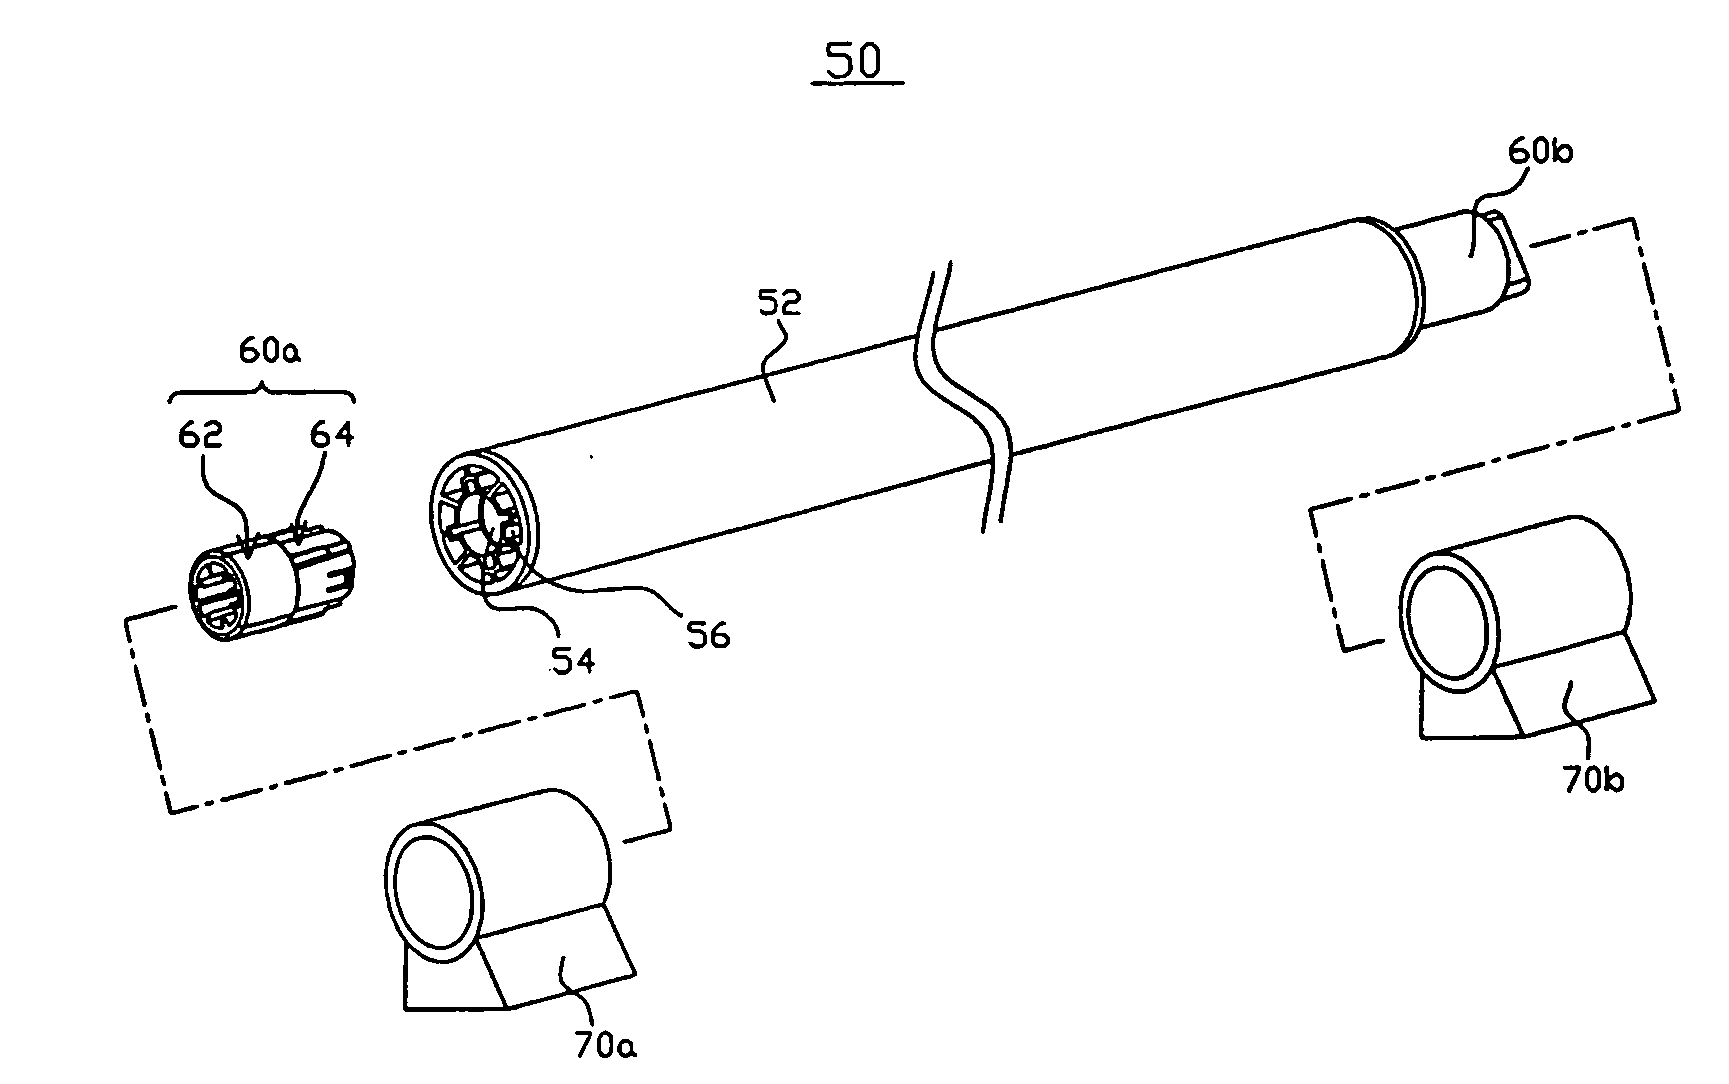 Photosensitive drum for printer cartridge and method for mounting the same